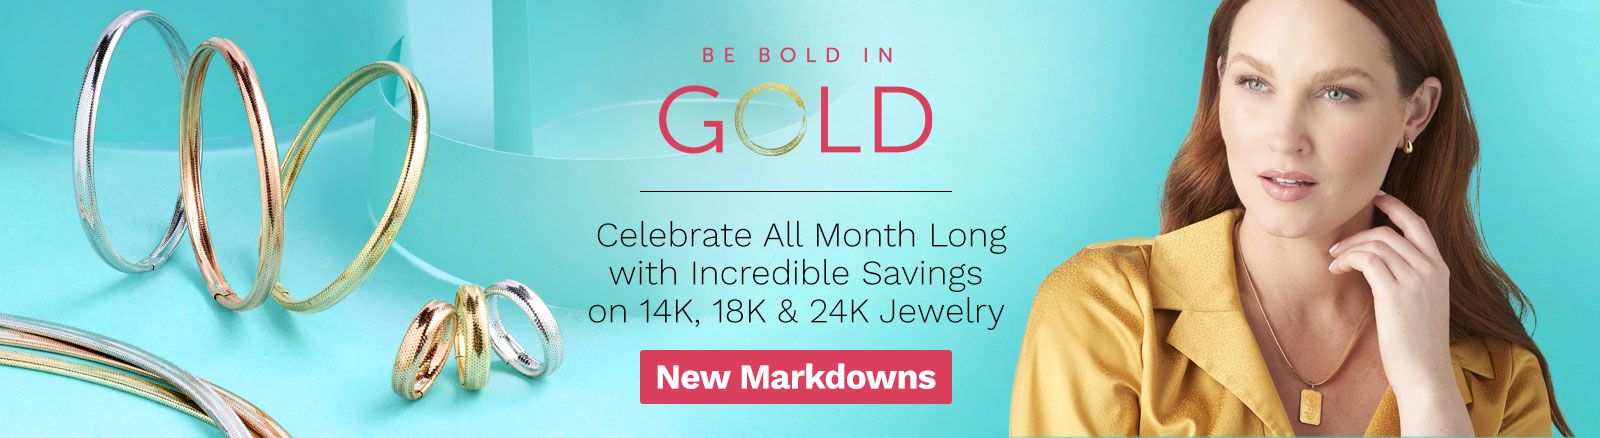 Be Bold in Gold Celebrate All Month Long with Incredible Savings on 14K, 18K & 24K Jewelry  ft.211-447, 211-444, 211-436, 203-711